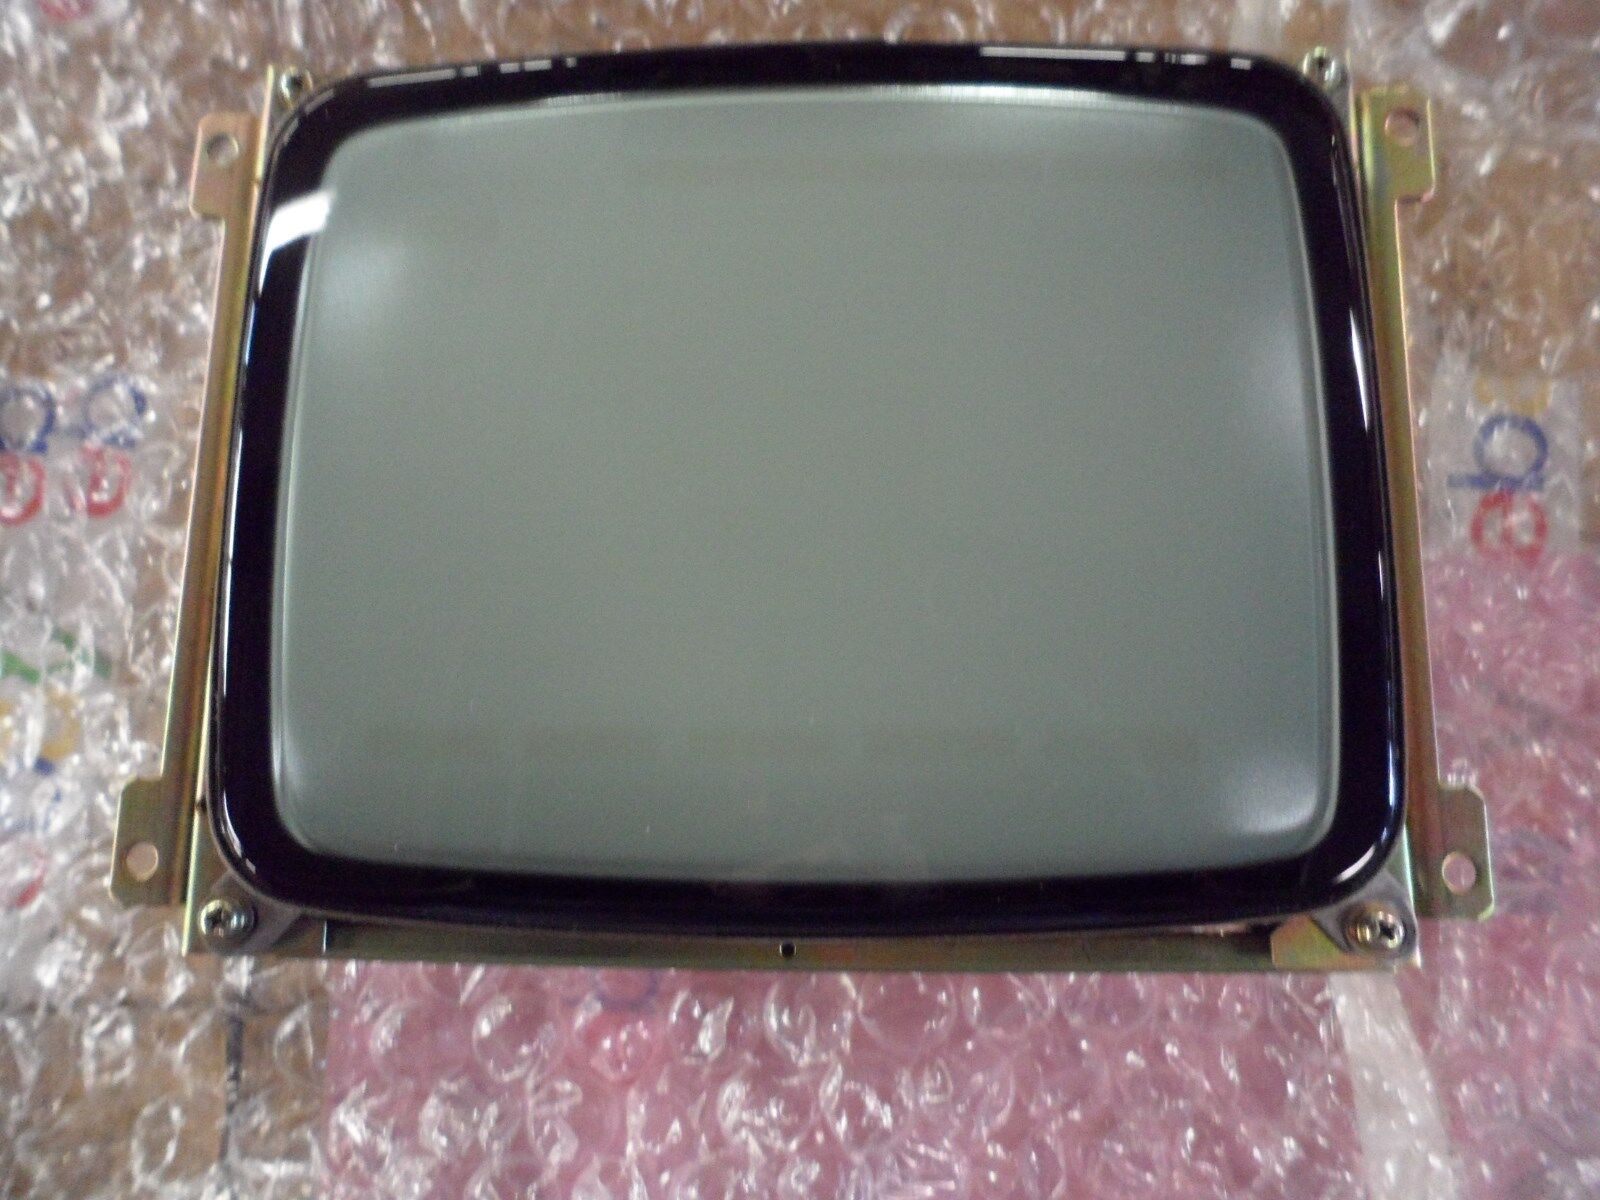 Totoku Electric Limited time sale MDT-941D Display 67% OFF of fixed price CRT Monitor